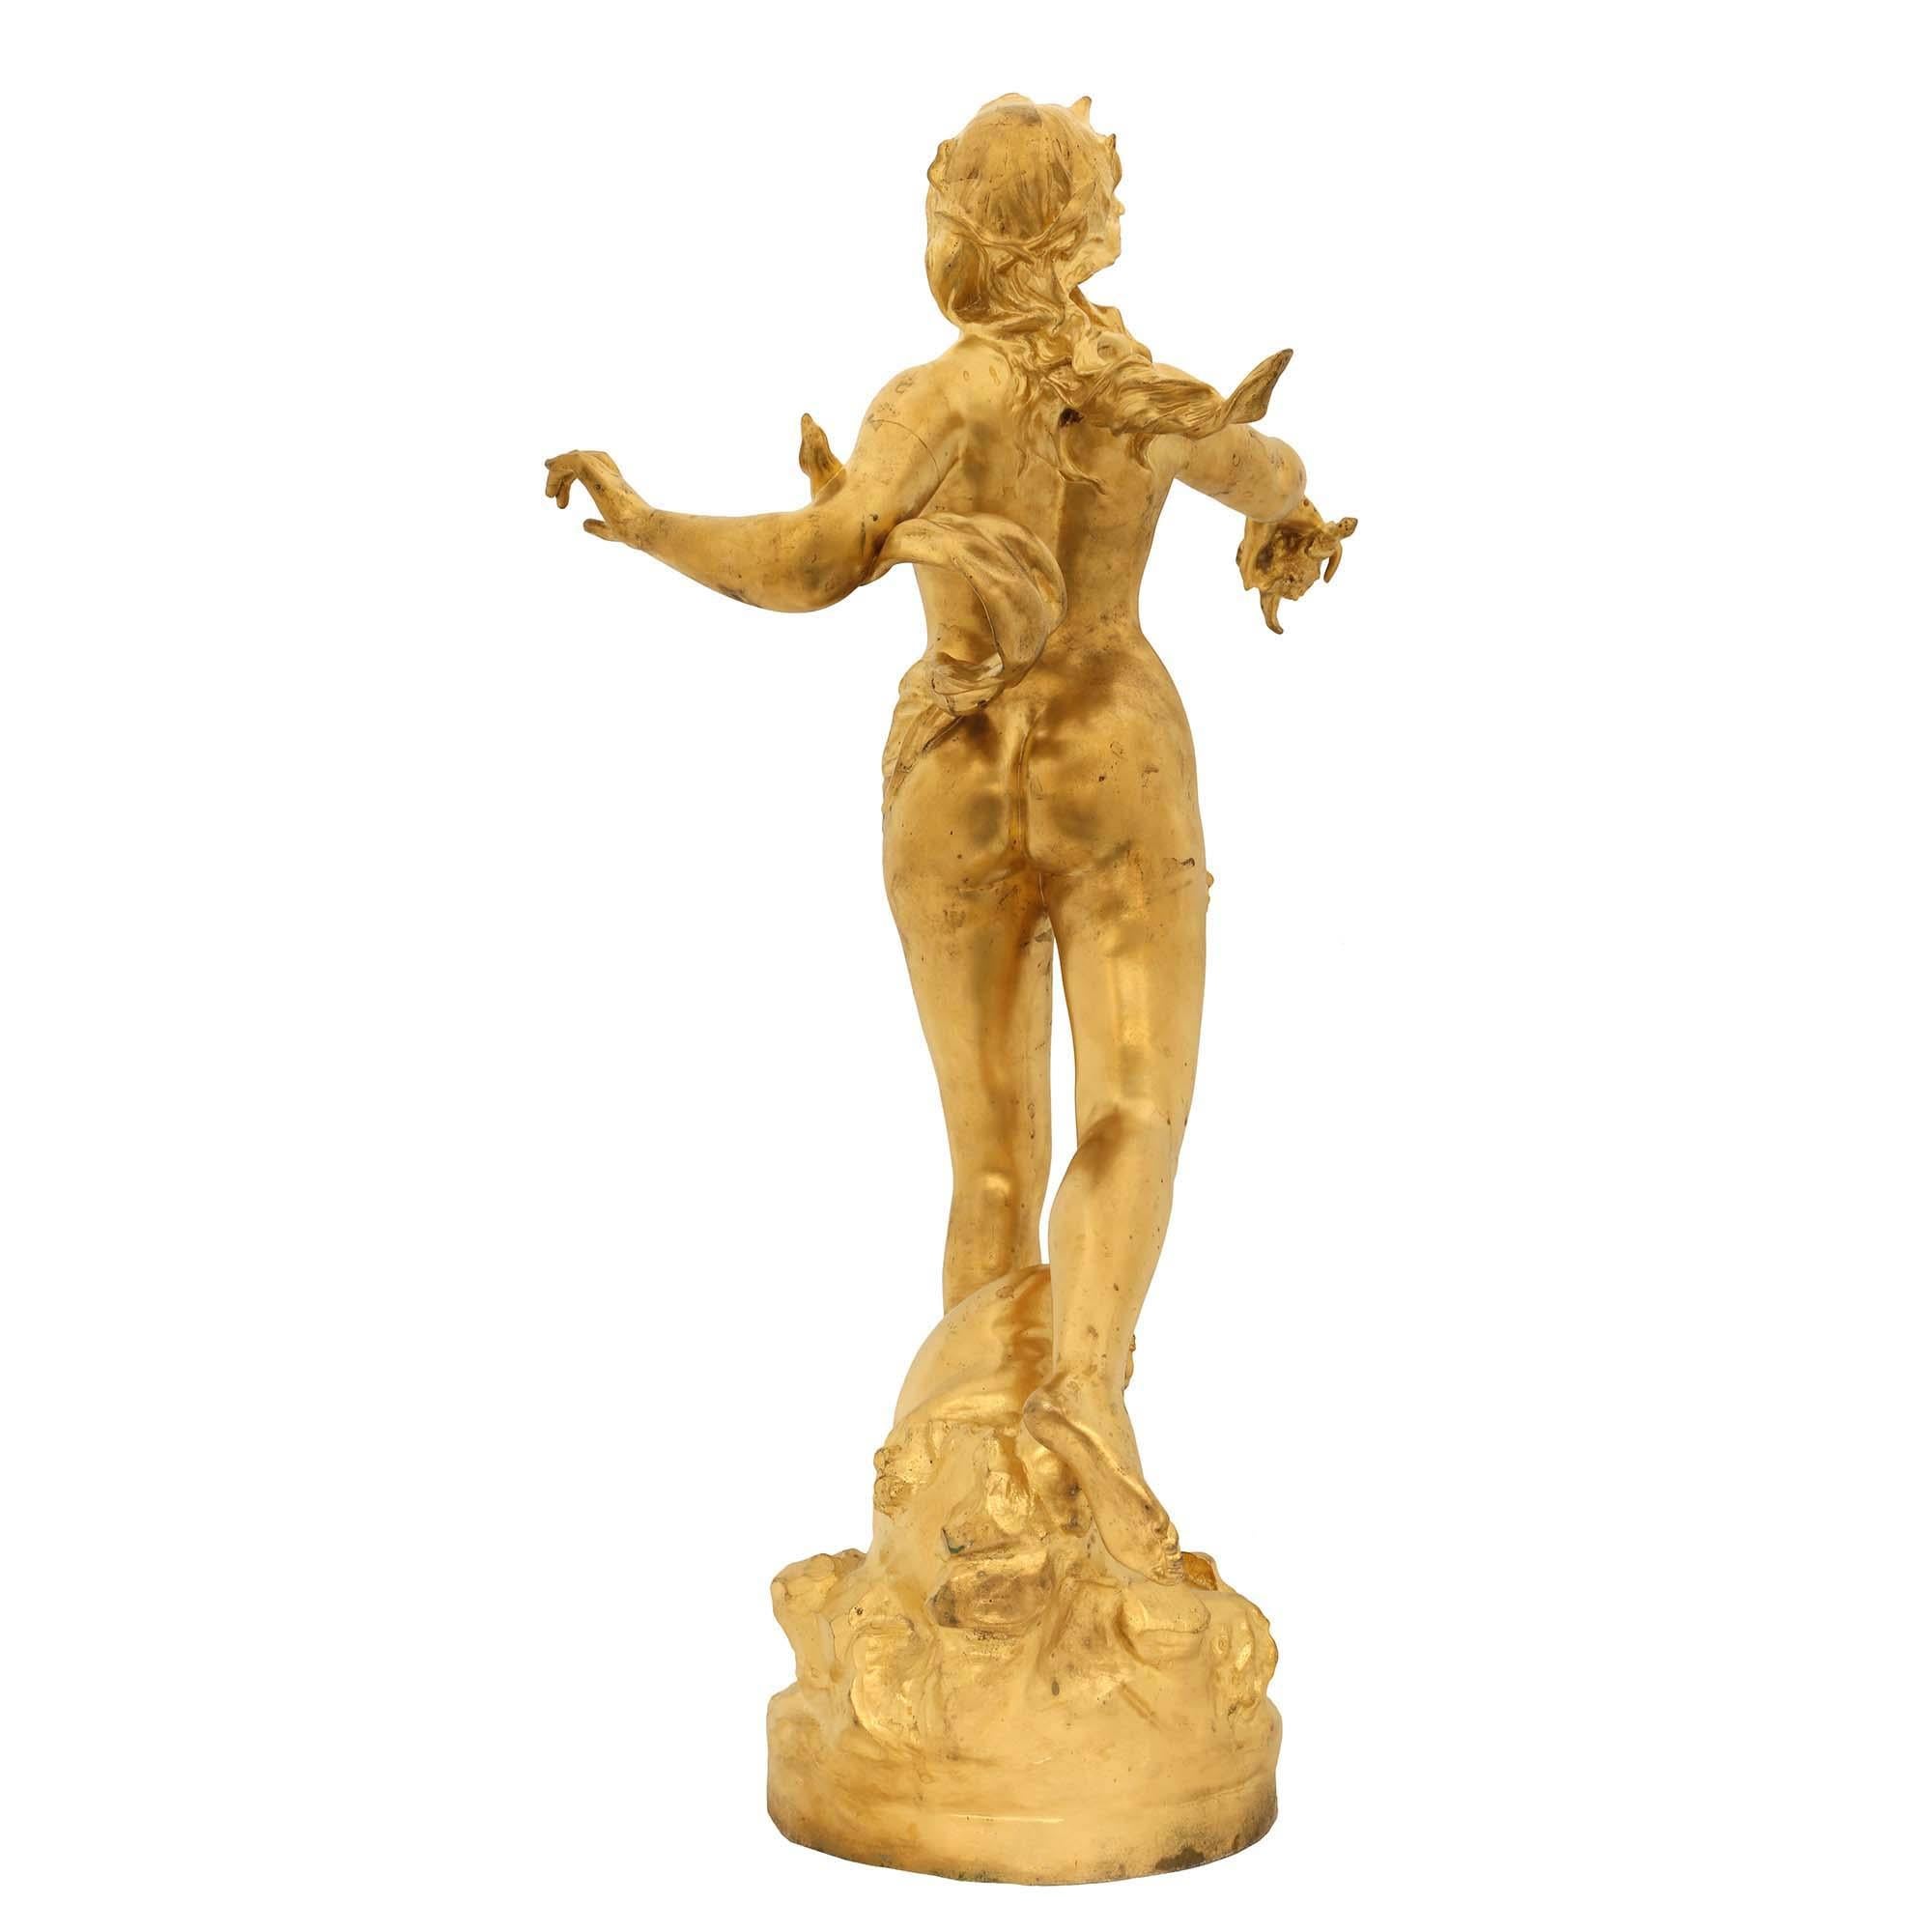  French 19th Century Ormolu Statue of Nereids, Signed Claude-André Férigoule For Sale 1